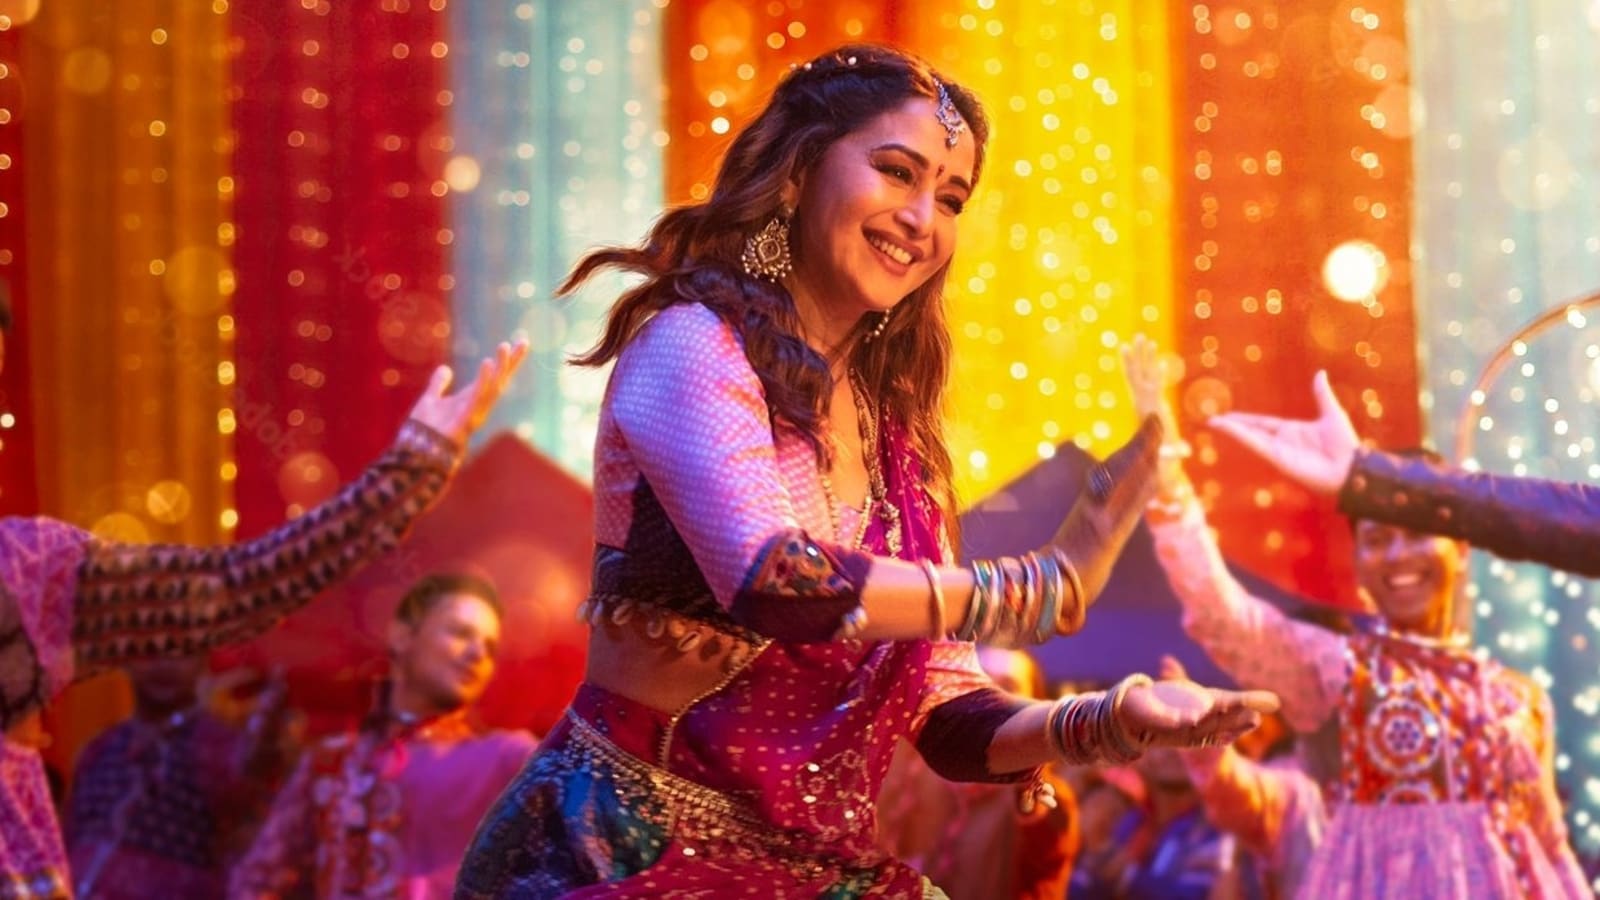 Maja Ma song Boom Padi: Madhuri Dixit returns in ‘dancing queen’ avatar, fans amazed at her energy at 55. Watch